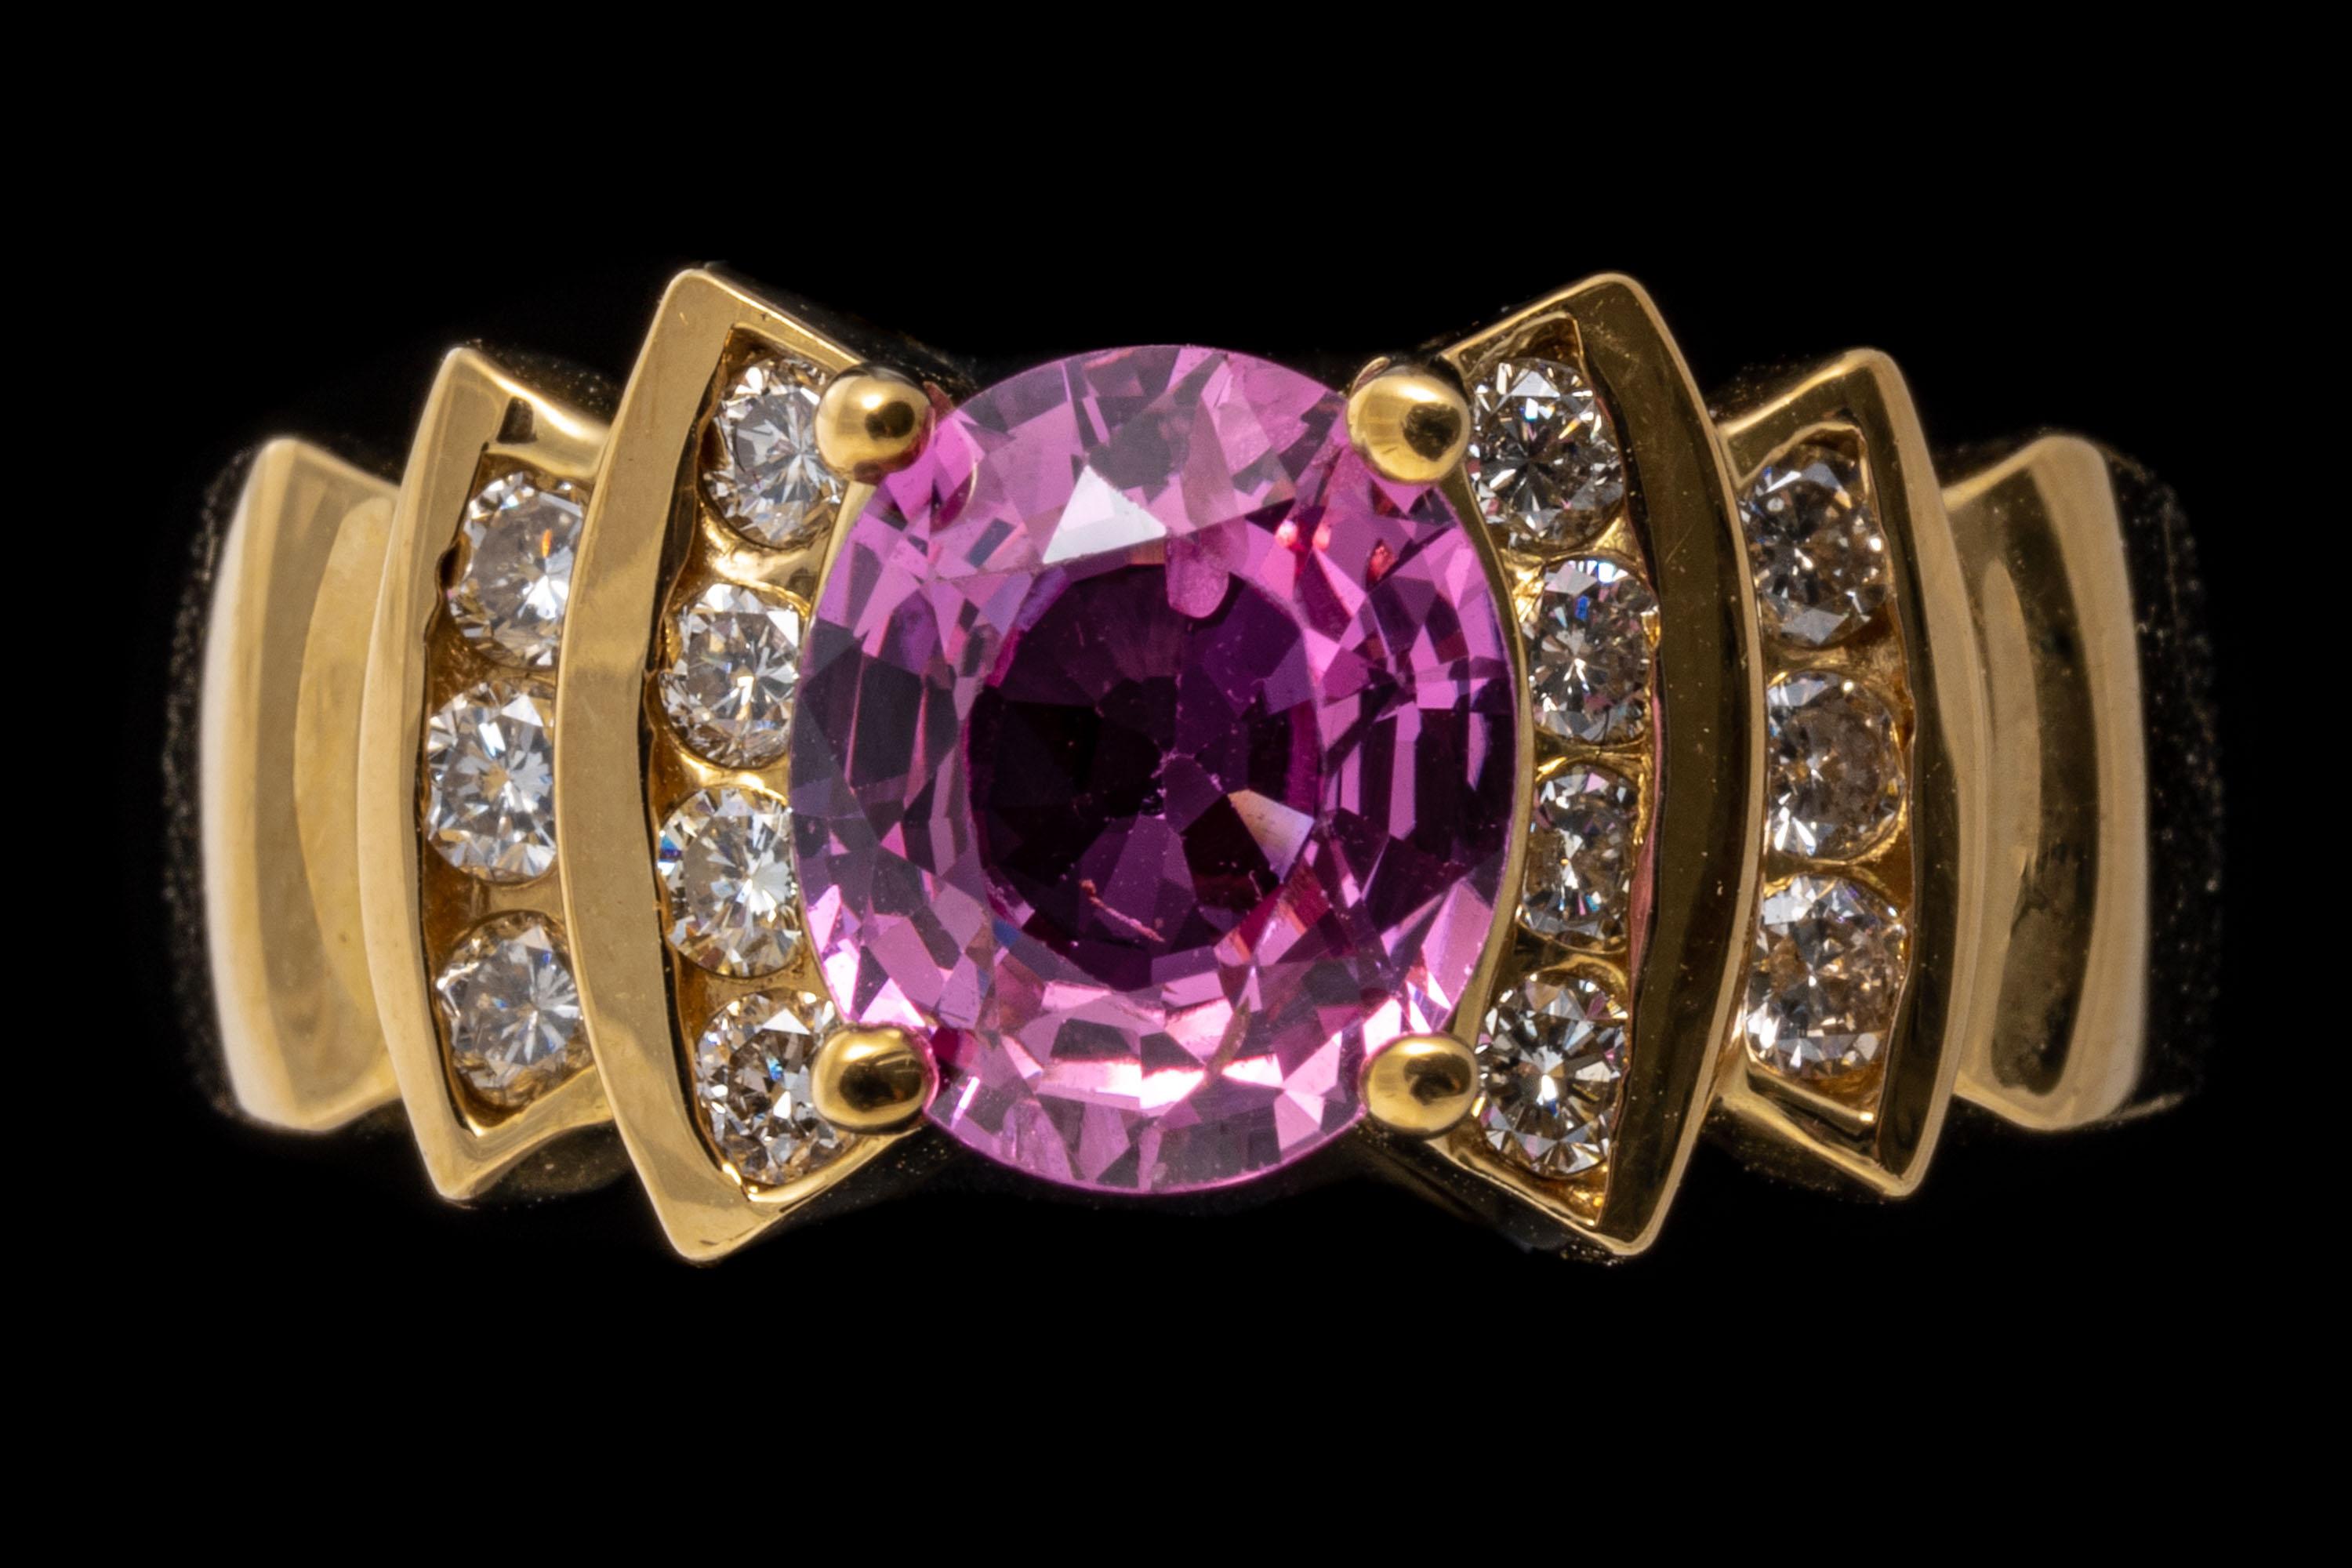 18k yellow gold ring. This beautiful, colorful ring features a faceted oval shape, deep pink color pink sapphire center stone, approximately 1.43 CTS and prong set. Flanking the stone are curved, stepped sides, set with round brilliant cut diamonds,